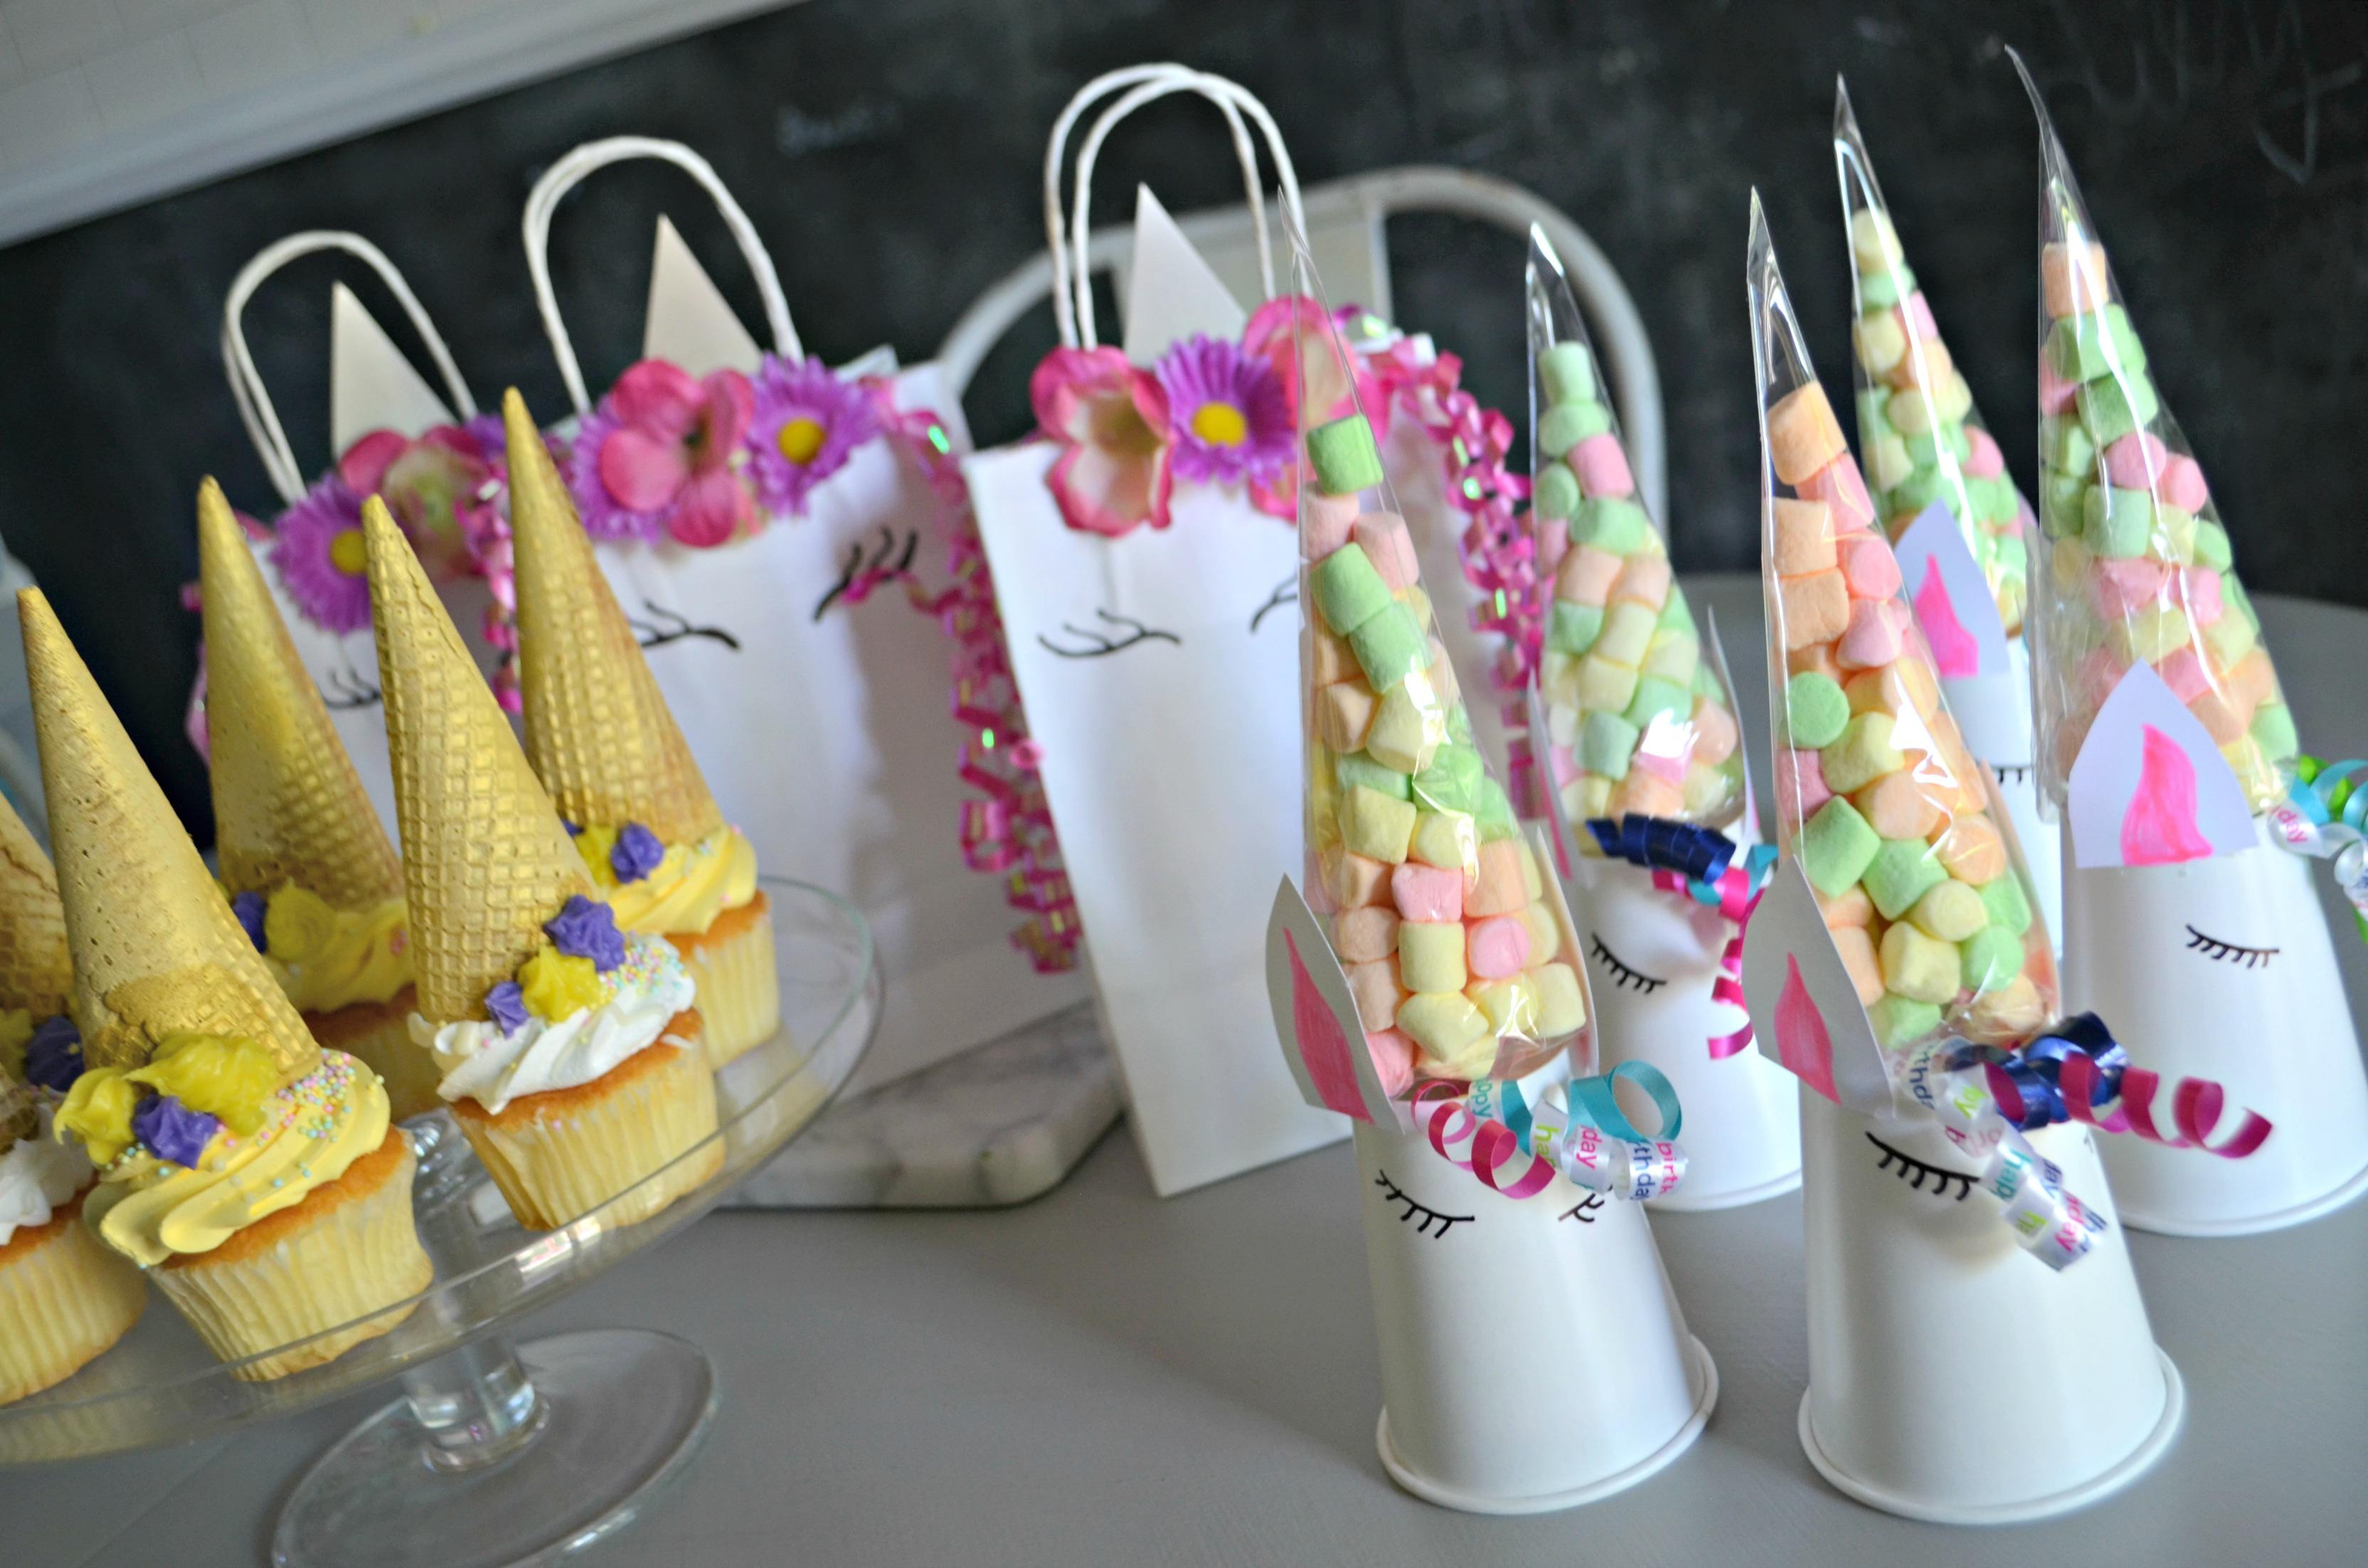 Unicorn Party Favor Ideas
 Make These 3 Frugal Cute and Easy DIY Unicorn Birthday